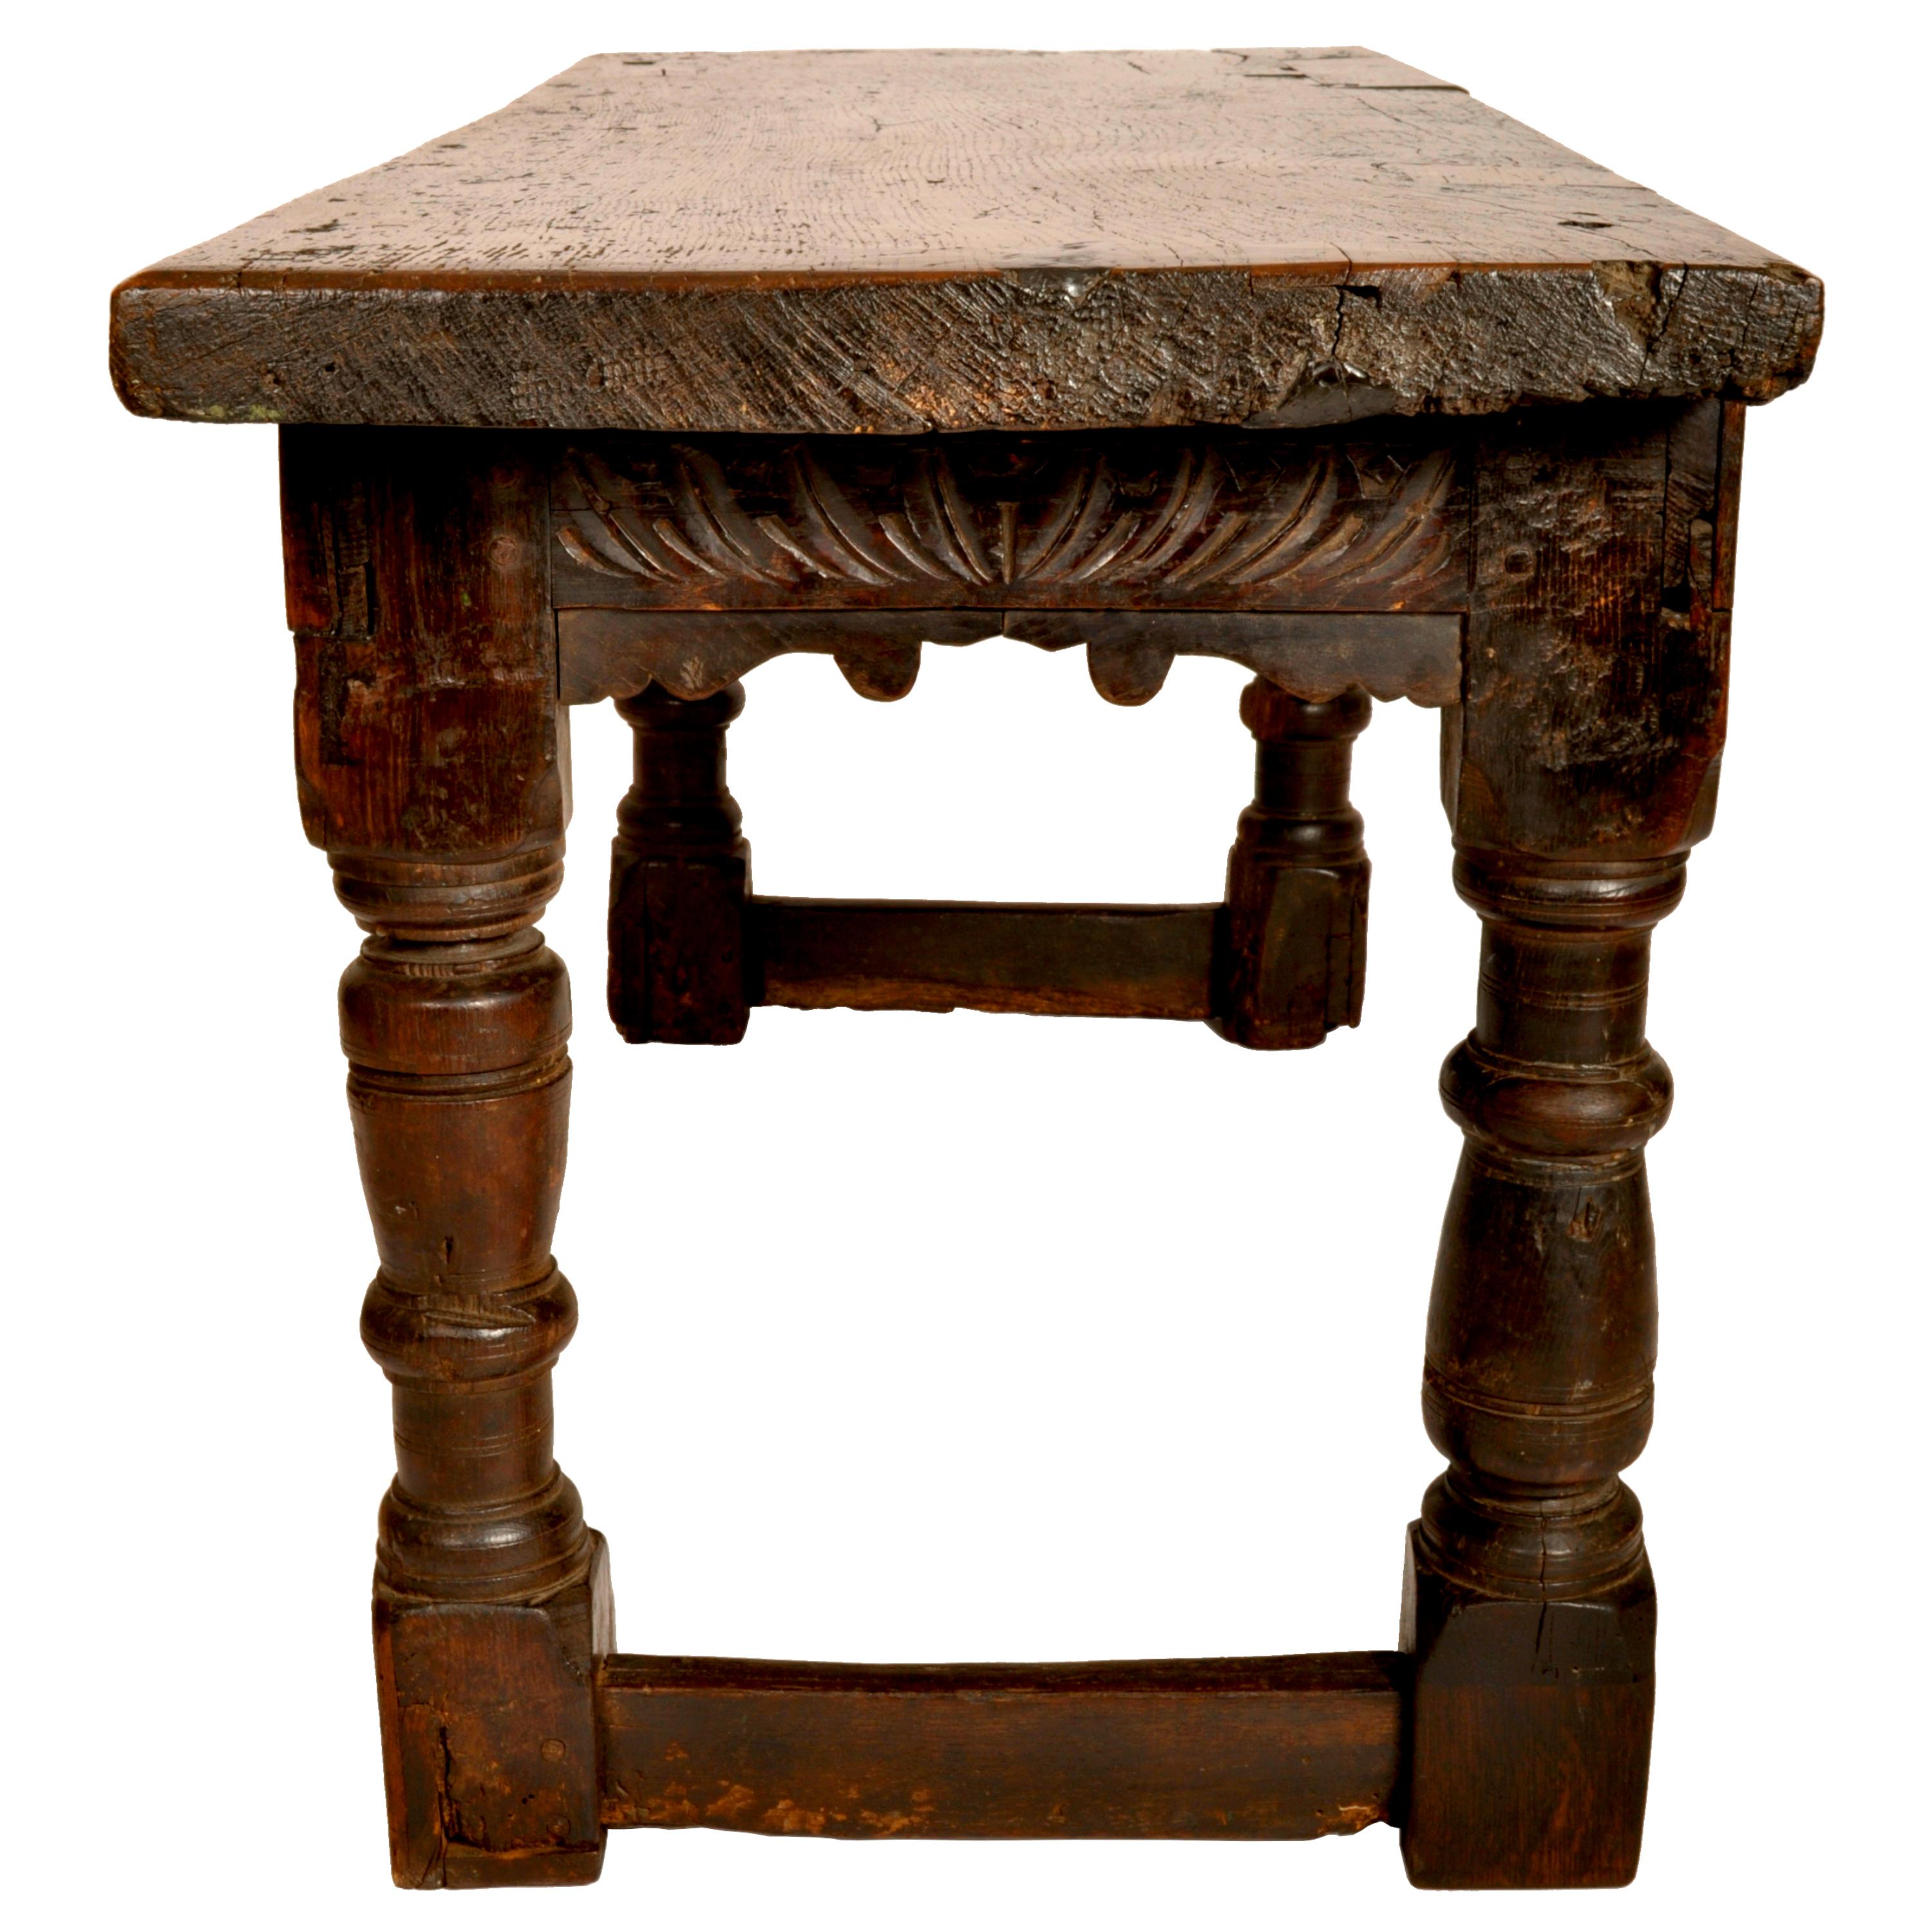 Antique 16th Century Elizabethan Tudor Carved Oak Dining Refectory Table, 1550 3